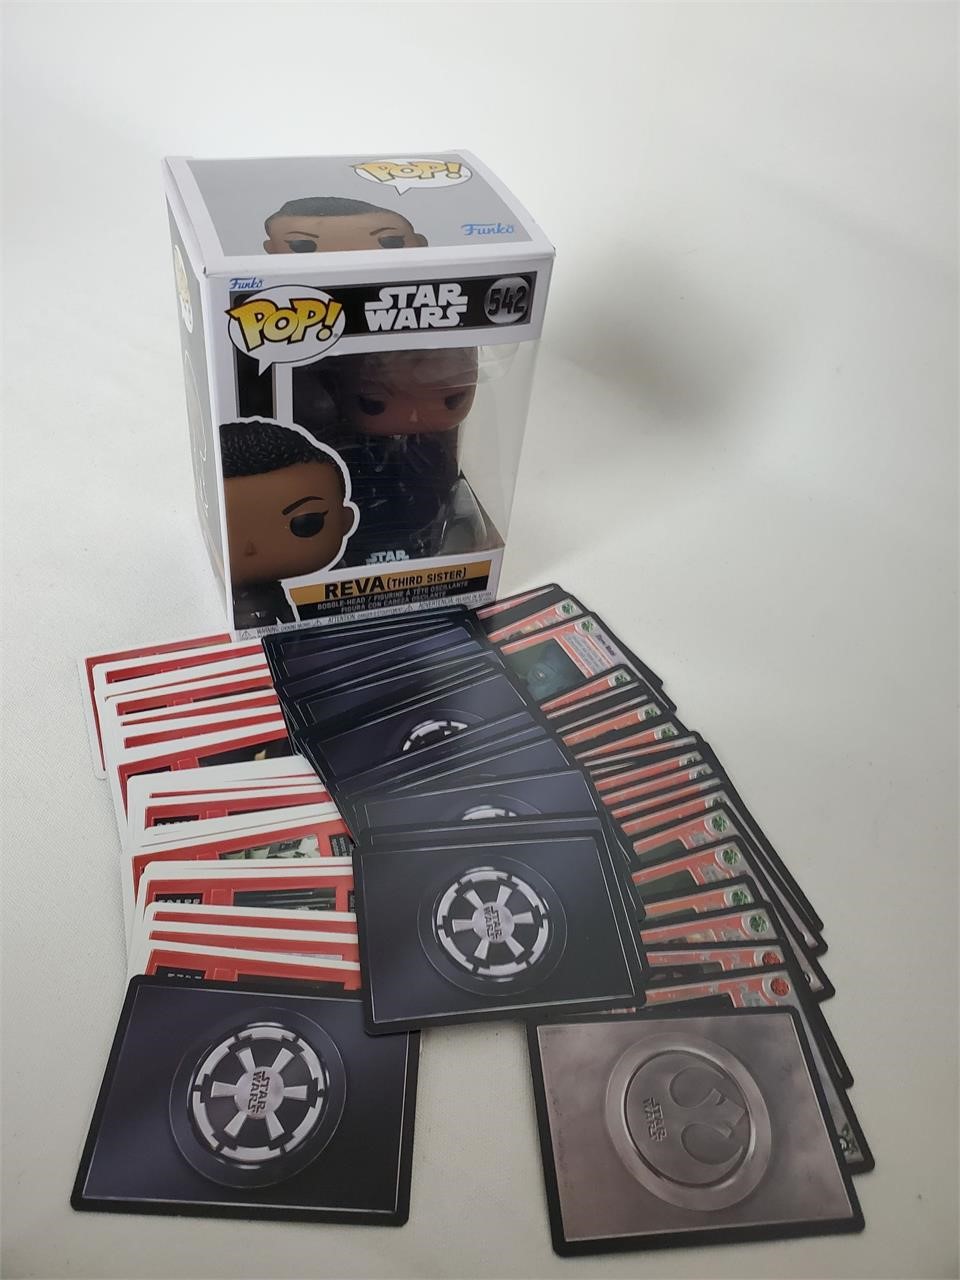 Star Wars Funko and Trading Cards